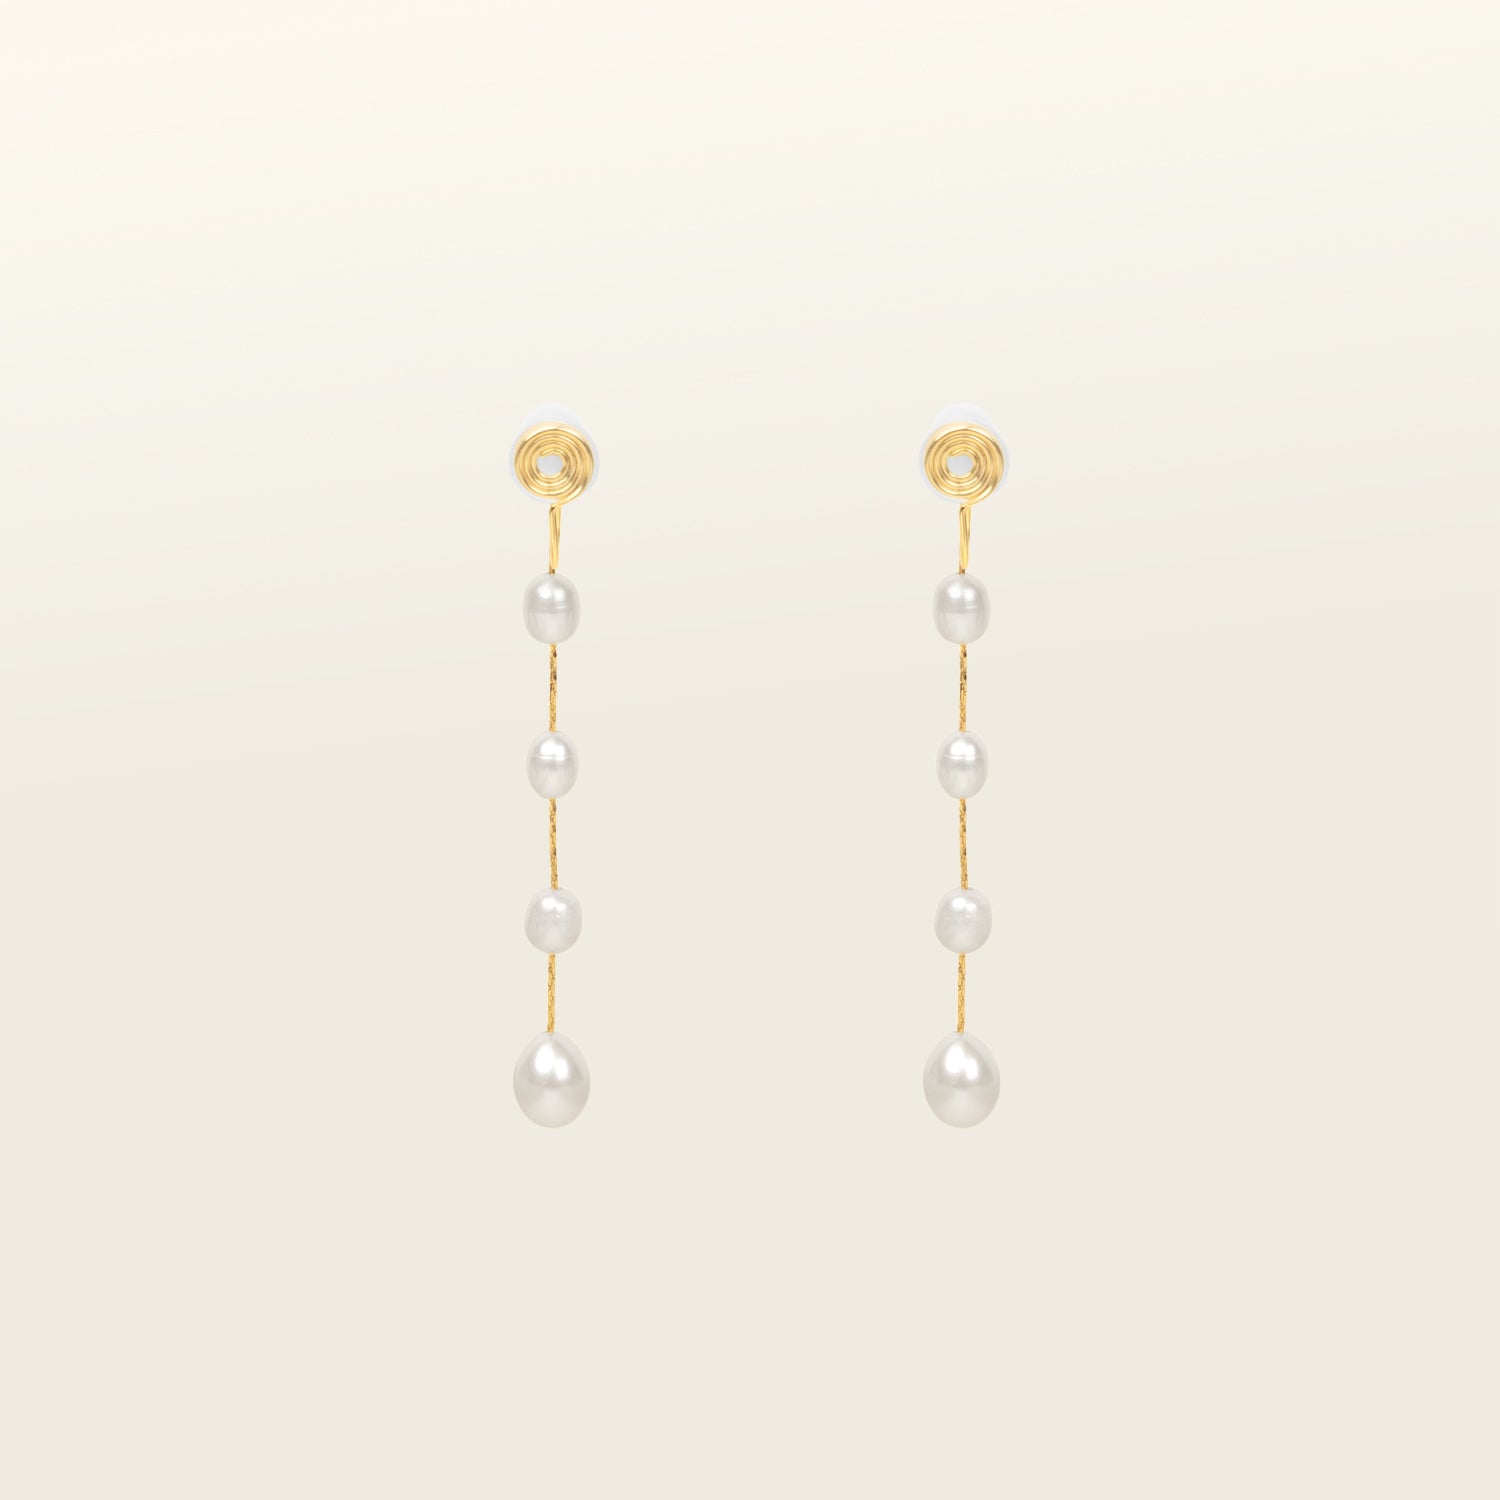 Image of the Lune Pearl Clip-On Earrings in Gold feature a unique, secure mosquito coil clasp. They are ideal for all ear types, from thick and large ears to sensitive and small. With medium hold strength, the earrings can be comfortably worn up to 24 hours and easily adjusted. Crafted with freshwater pearls, each pair may display natural variations in size and color. Materials include freshwater pearl and 18K gold-plated stainless steel.